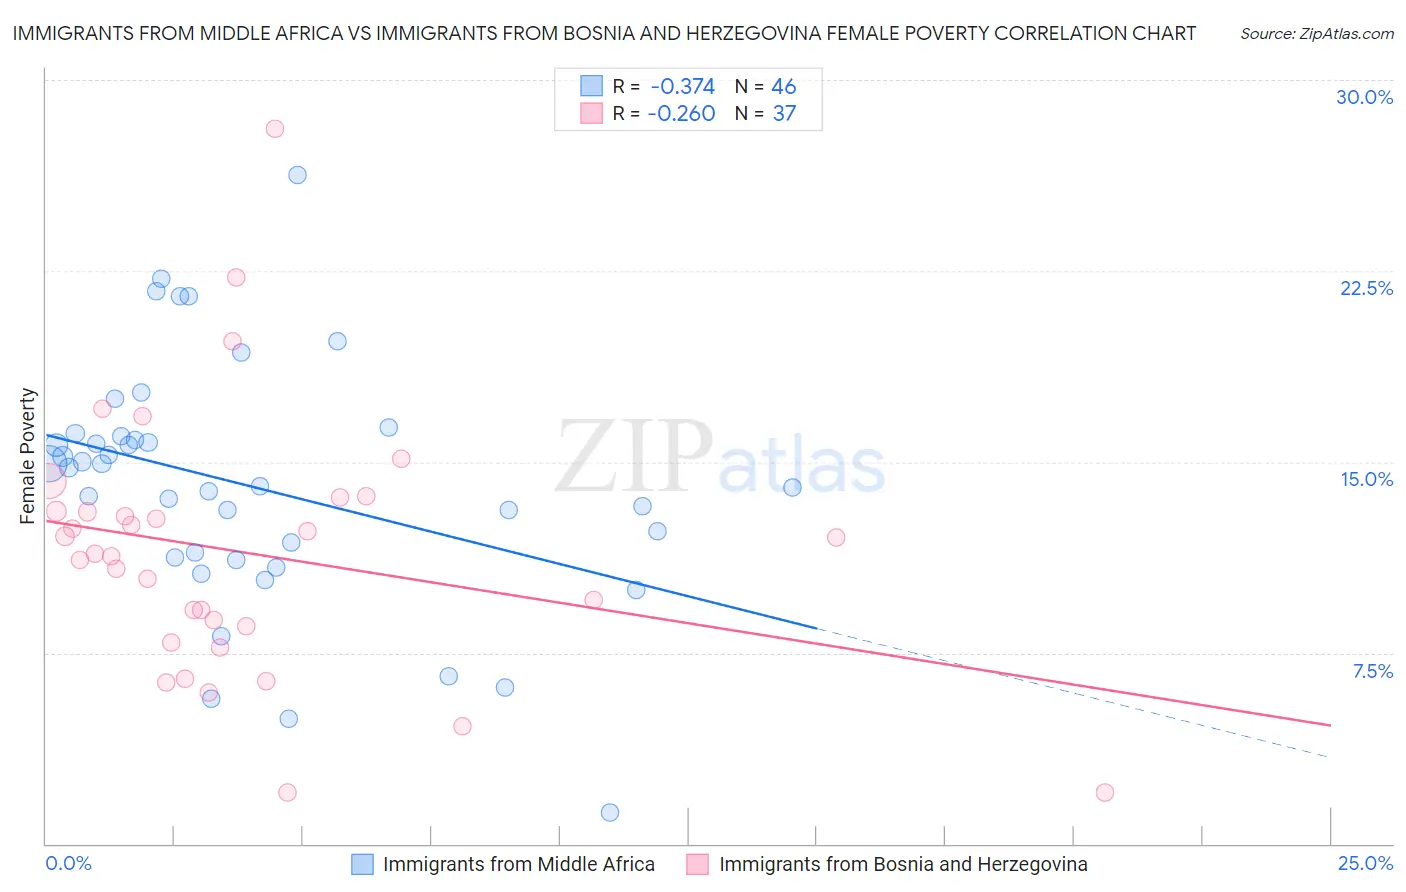 Immigrants from Middle Africa vs Immigrants from Bosnia and Herzegovina Female Poverty